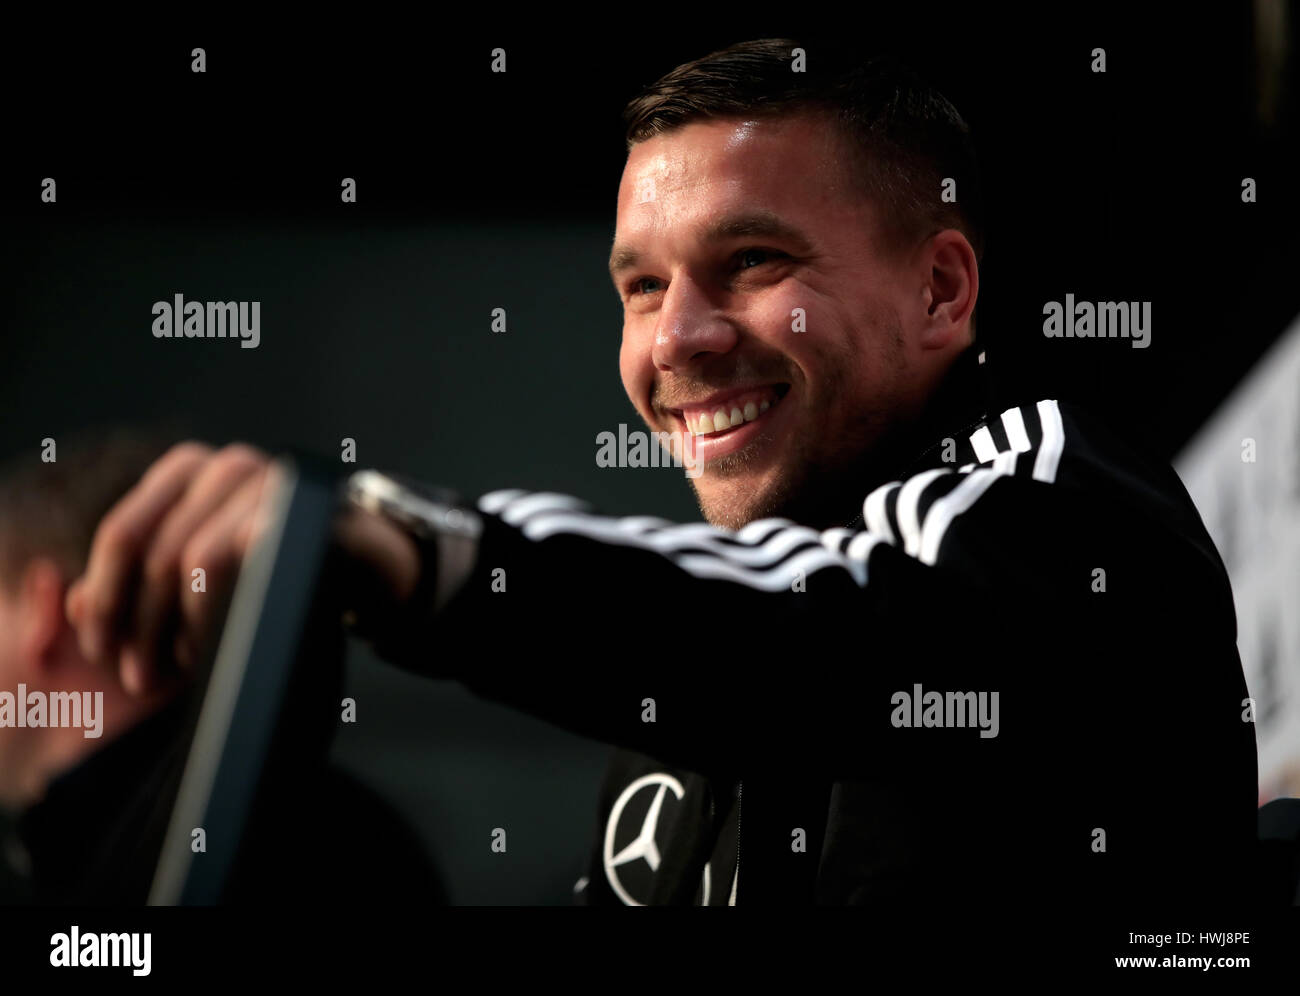 Germany's Lukas Podolski during a press conference at the DFB football Museum, Dortmund, Germany. Stock Photo